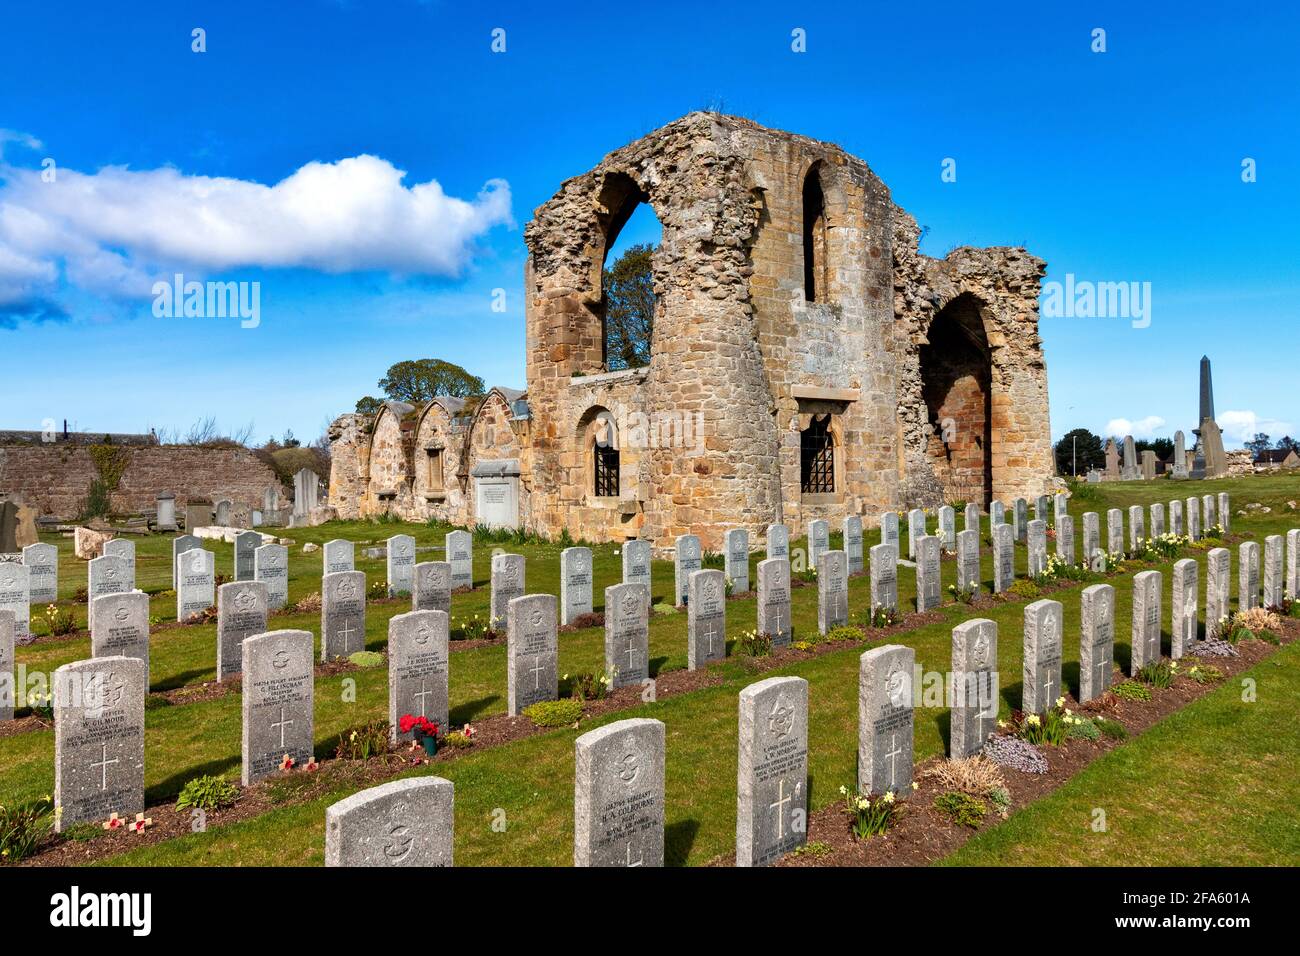 KINLOSS ABBEY MORAY SCOTLAND SIGNIFICANT REMAINS OF THE BUILDING WITH ROWS OF COMMONWEALTH AIR FORCE WAR GRAVES Stock Photo